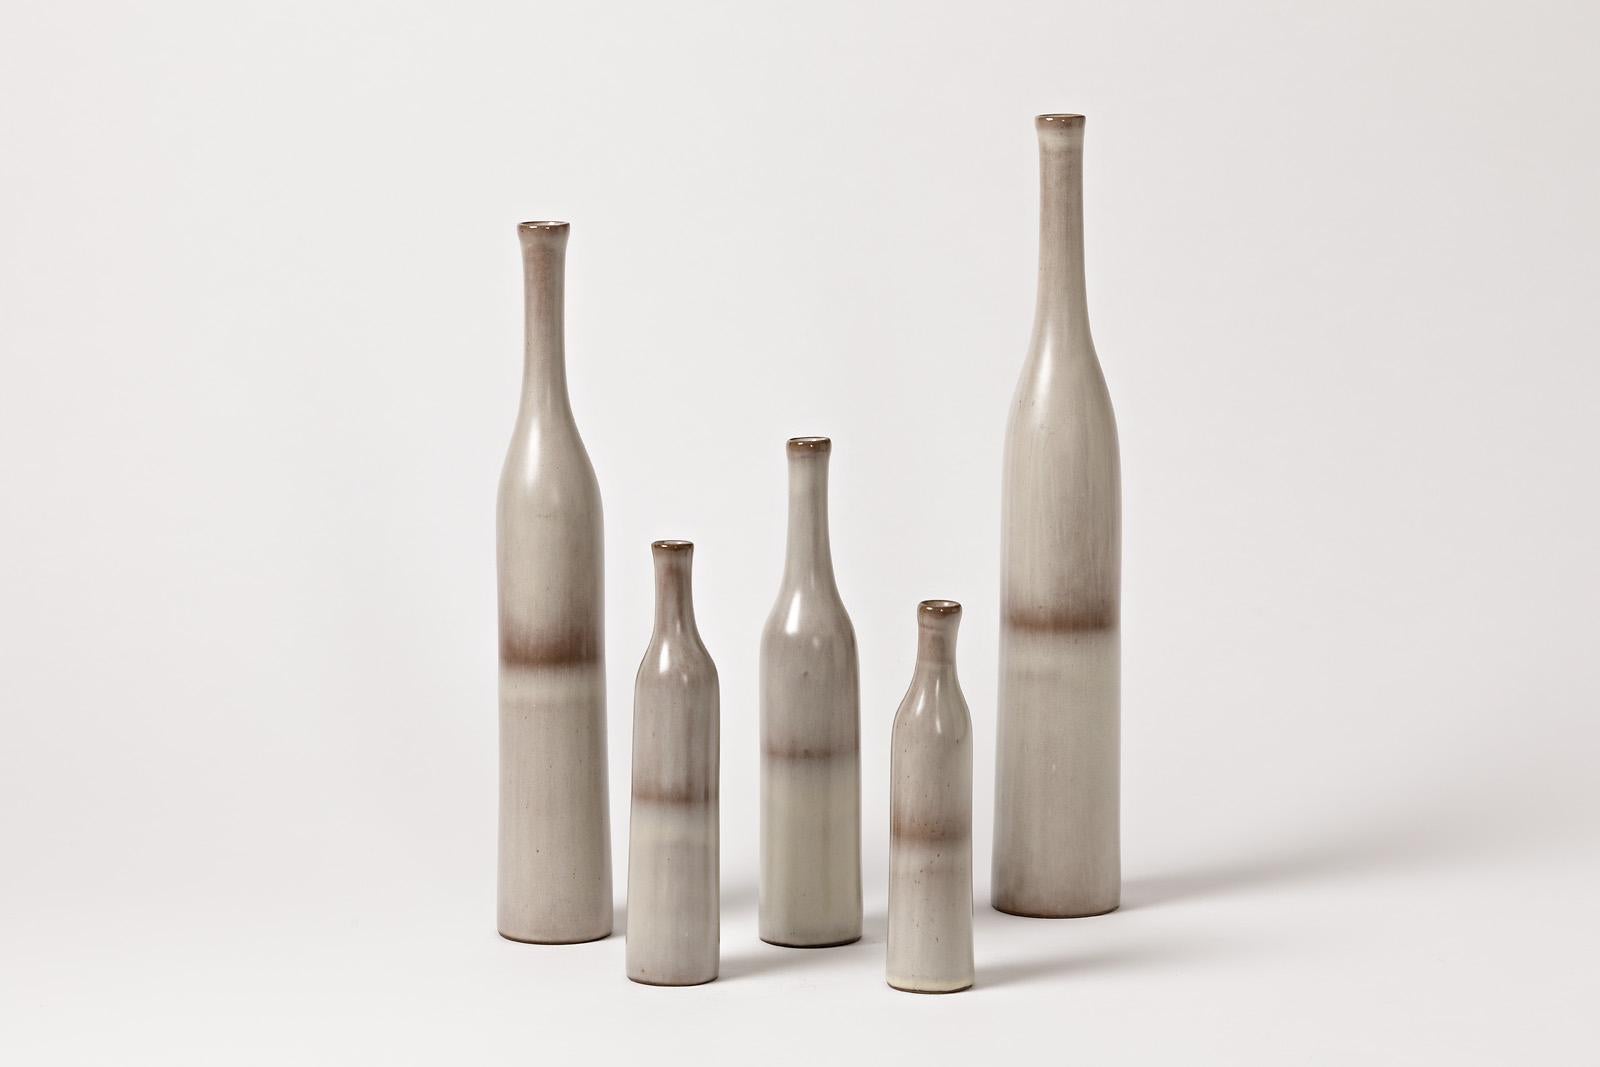 Jacques and Dani Ruelland

Rare original set composed of 5 ceramic bottles.

Excellent original conditions. Each one is signed under the base RUELLAND.

White and grey ceramic glaize colors.

Dimensions: 35 x 6cm / 31 x 5cm / 21.5 x 4.5cm /